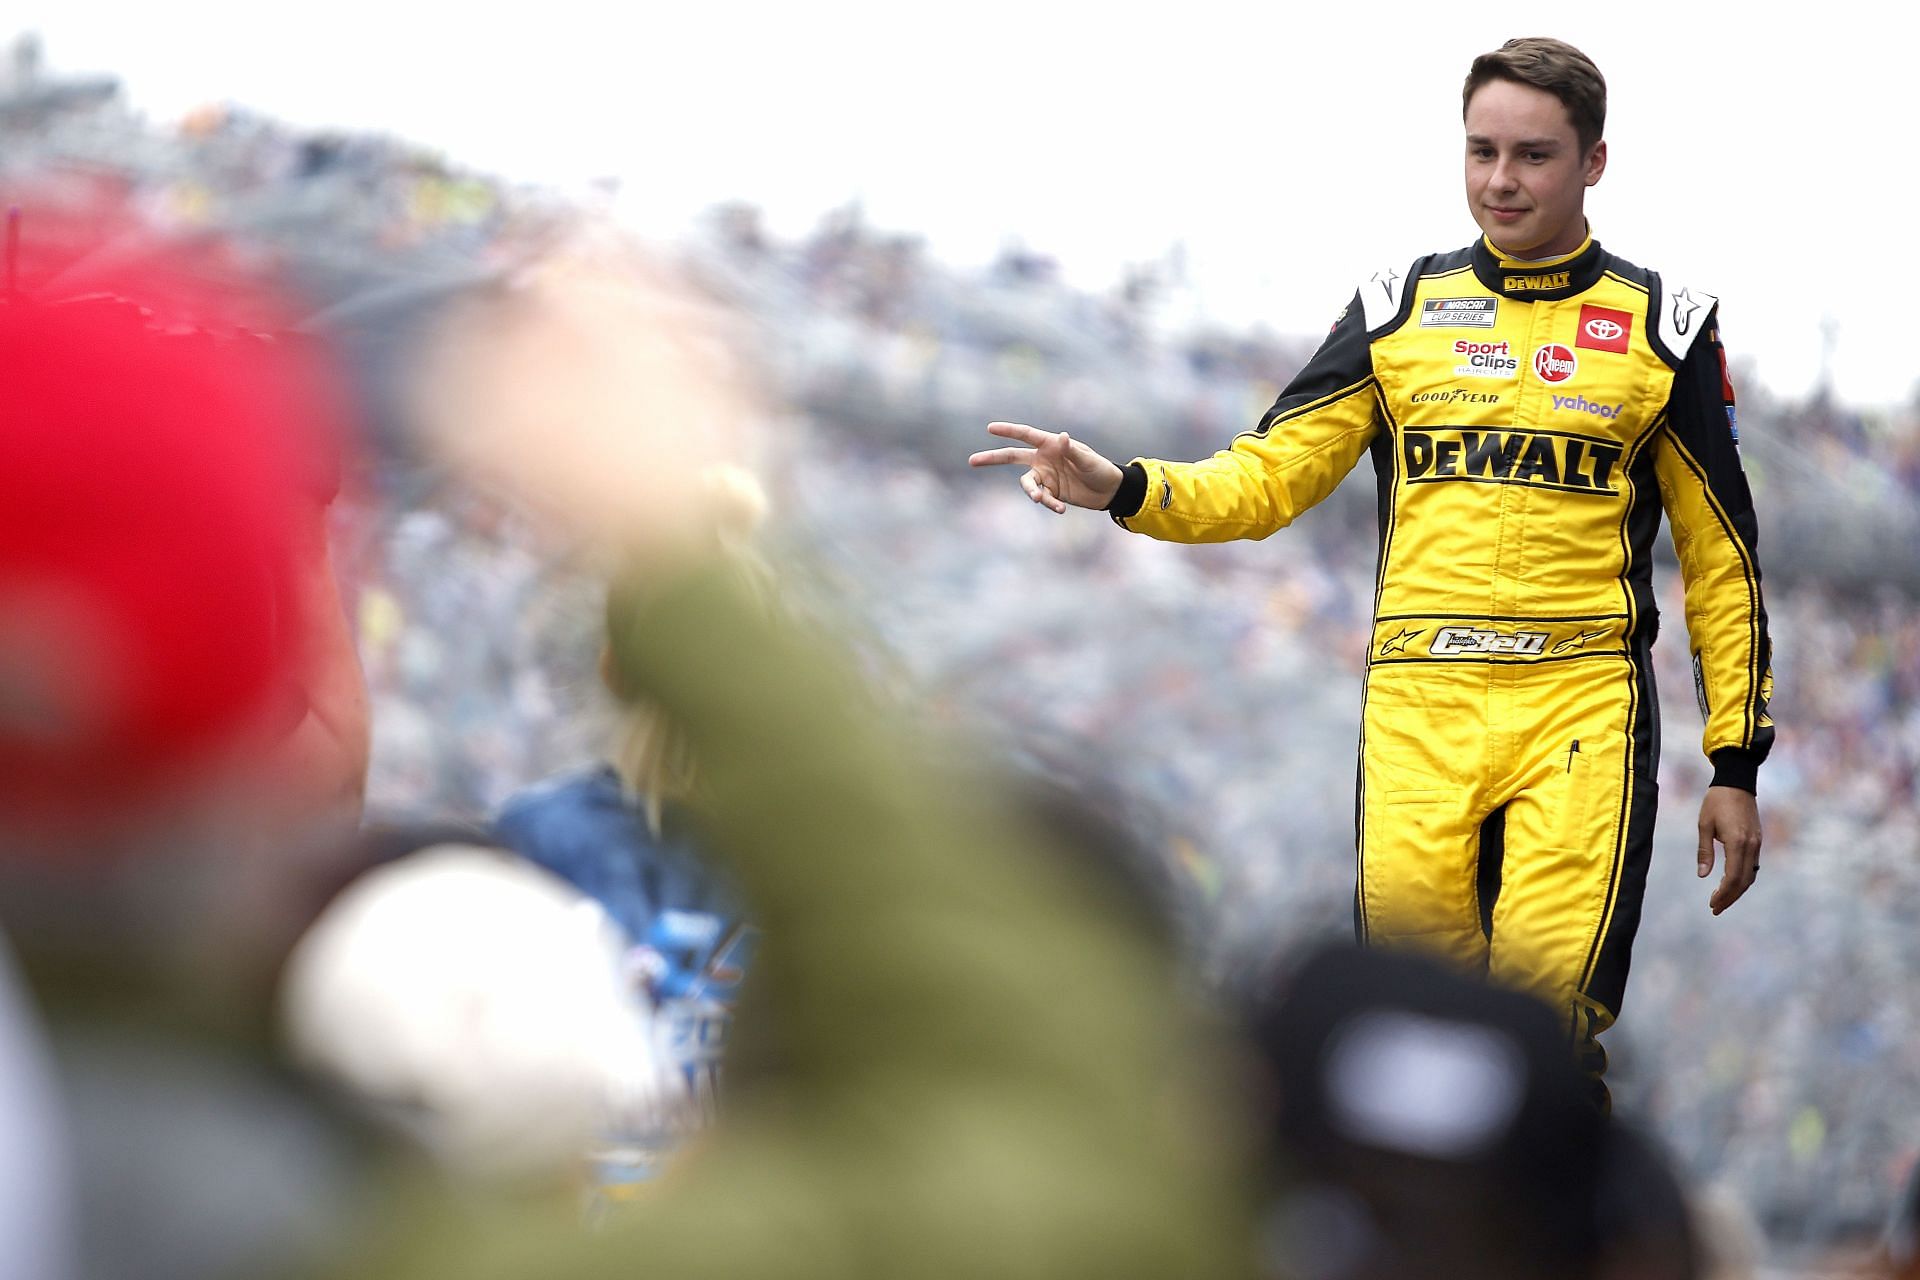 Christopher Bell waves to fans during the driver intros before the 2022 NASCAR Cup Series DuraMAX Drydene 400 presented by RelaDyne at Dover Motor Speedway in Dover, Delaware. (Photo by Sean Gardner/Getty Images)